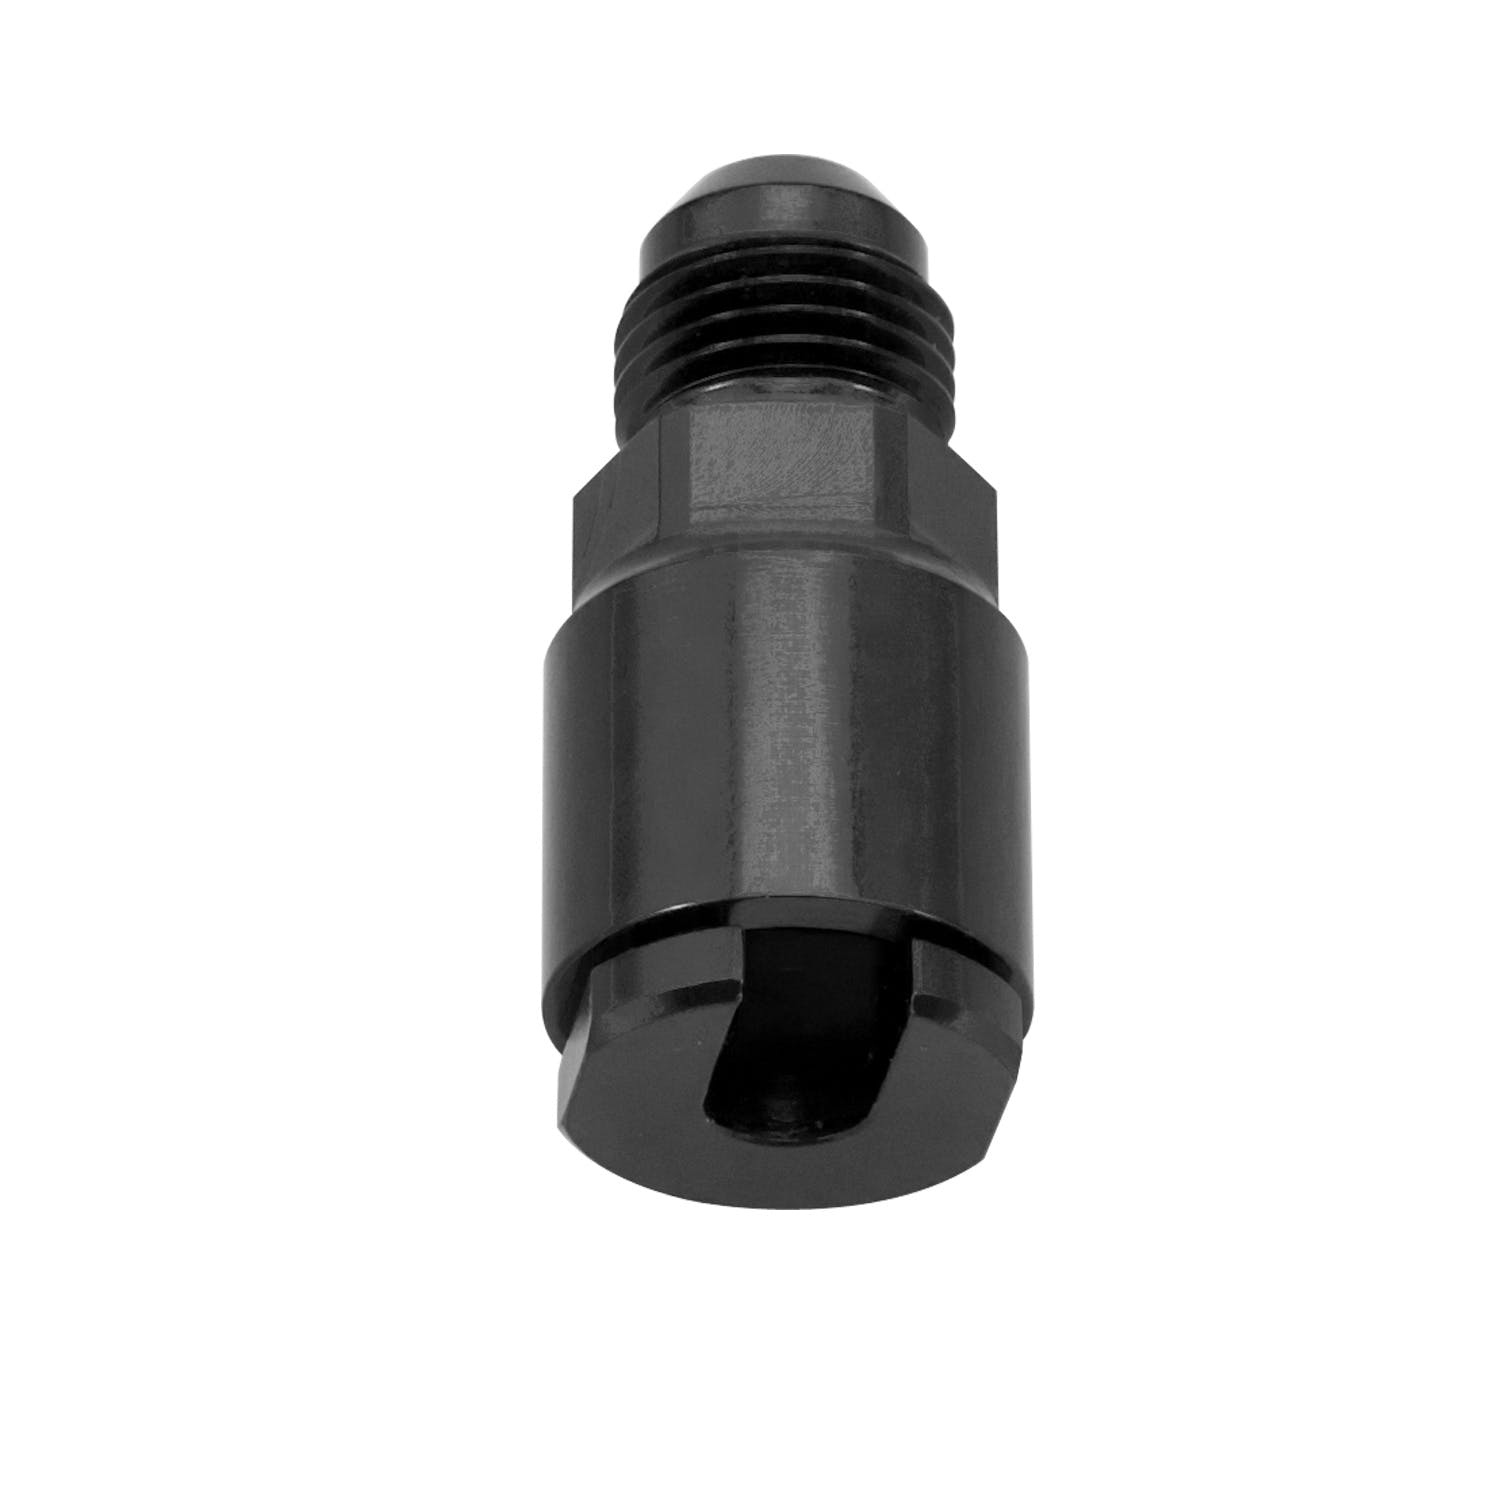 Russell 641303 EFI fuel fitting; 6-AN male to 1/4 inch female quick connect; black finish